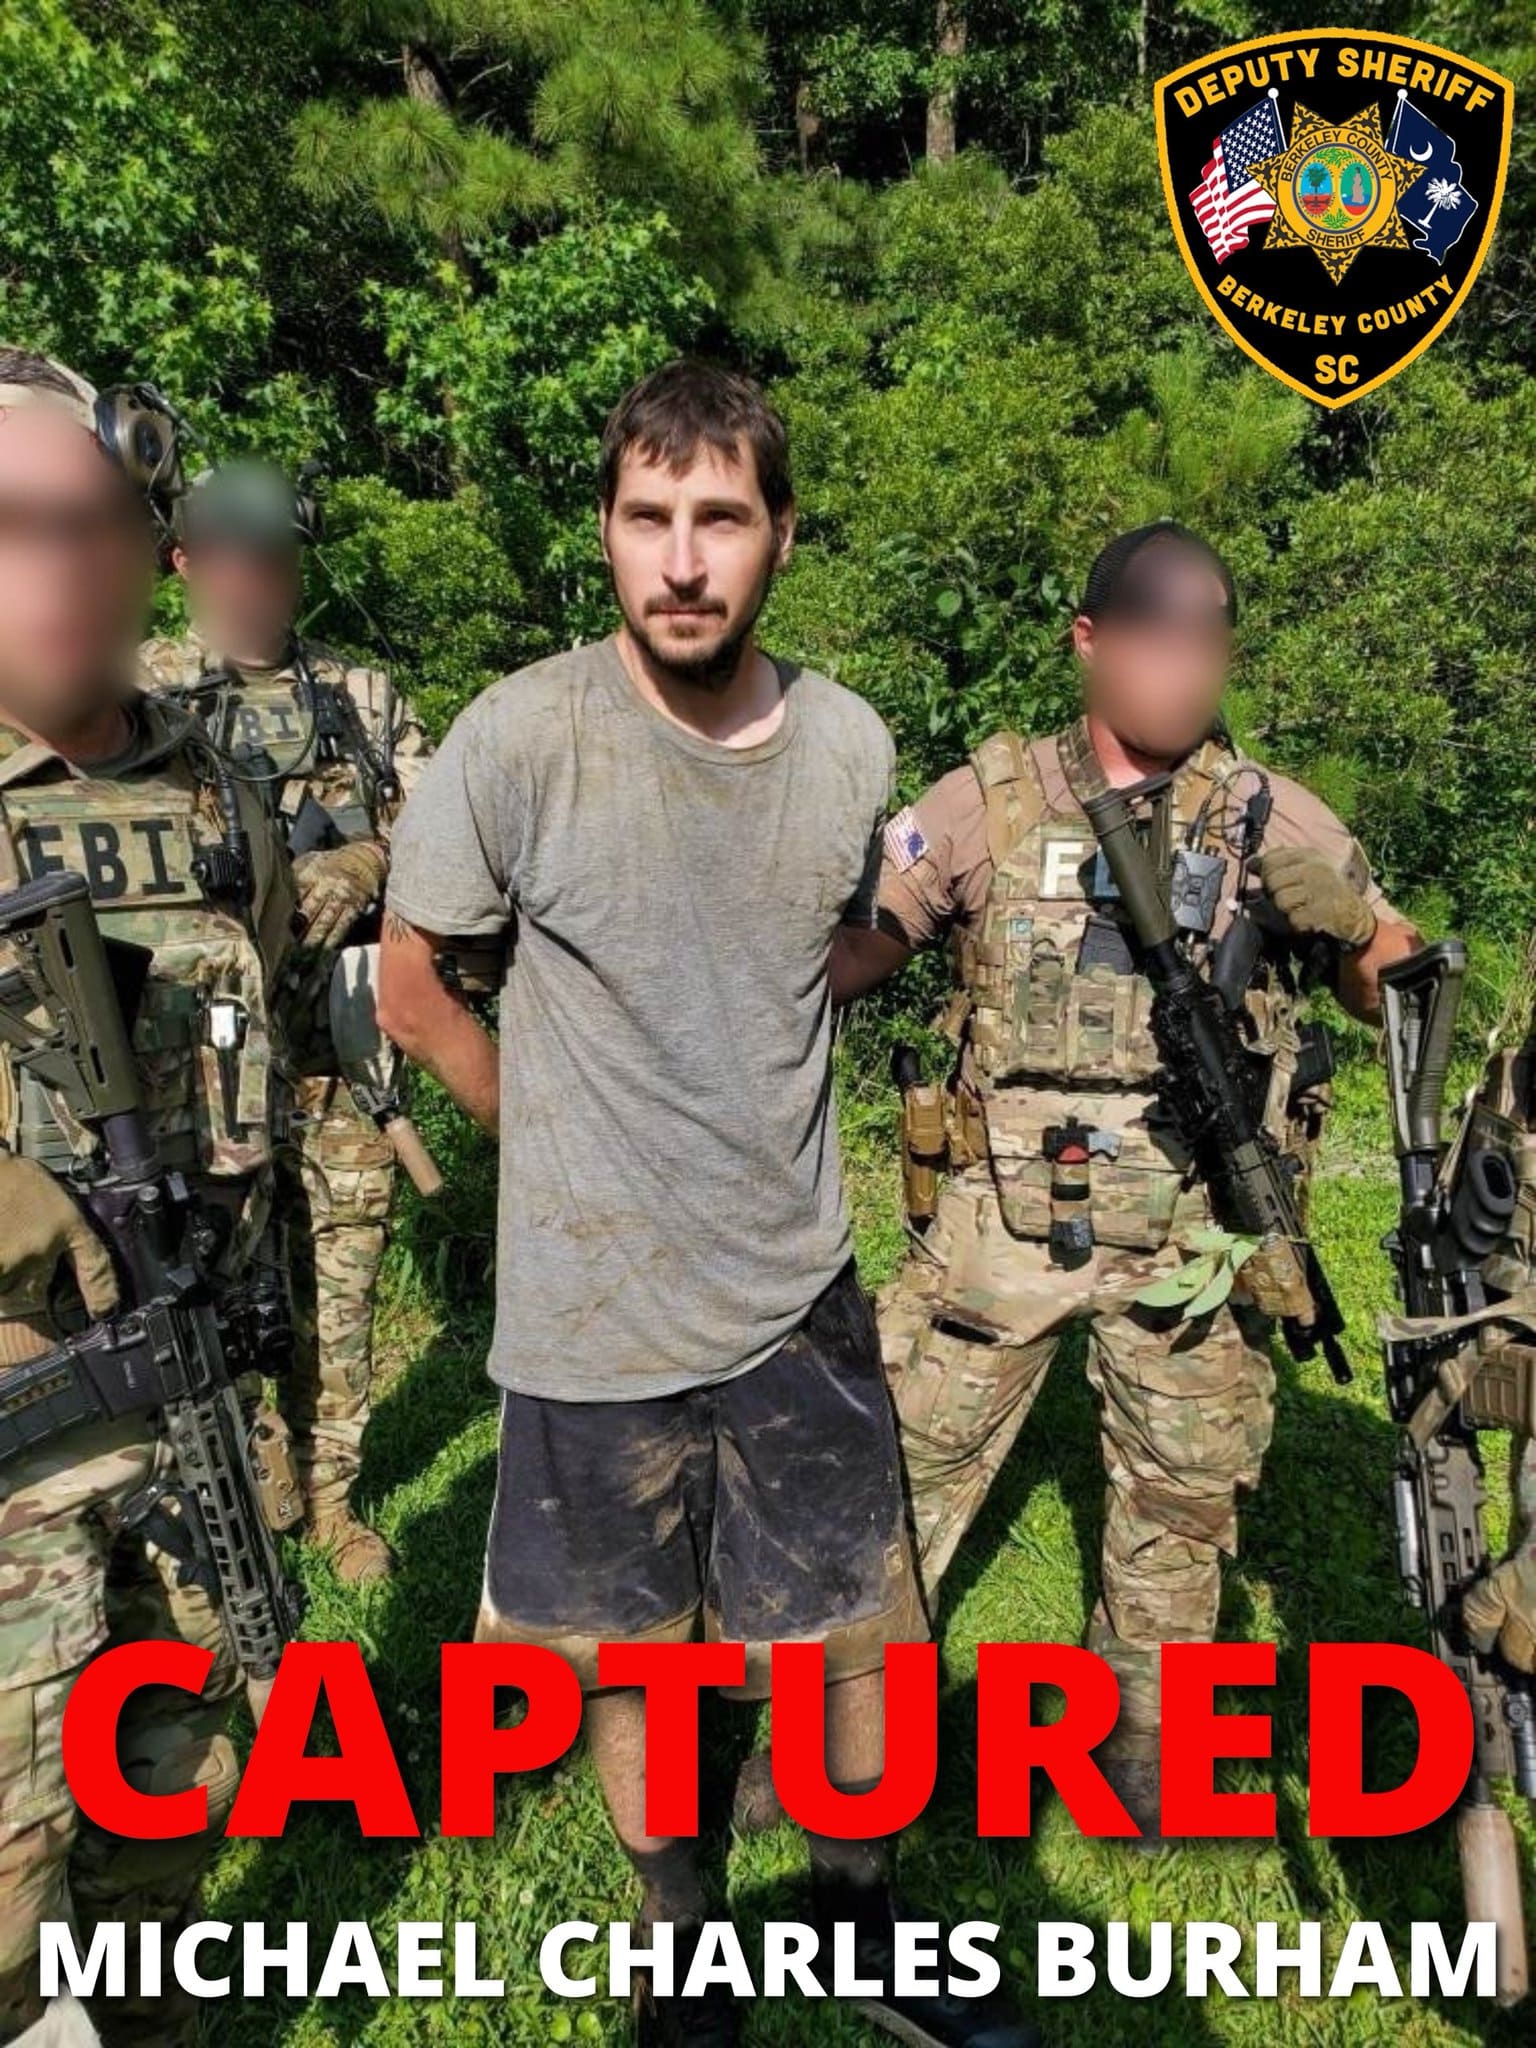 PHOTO: Michael Charles Burham, 34, was arrested after an exhaustive weeks-long search in South Carolina, according to the Berkeley County Sheriffs Office, which released this image Wednesday, May 24, 2023.